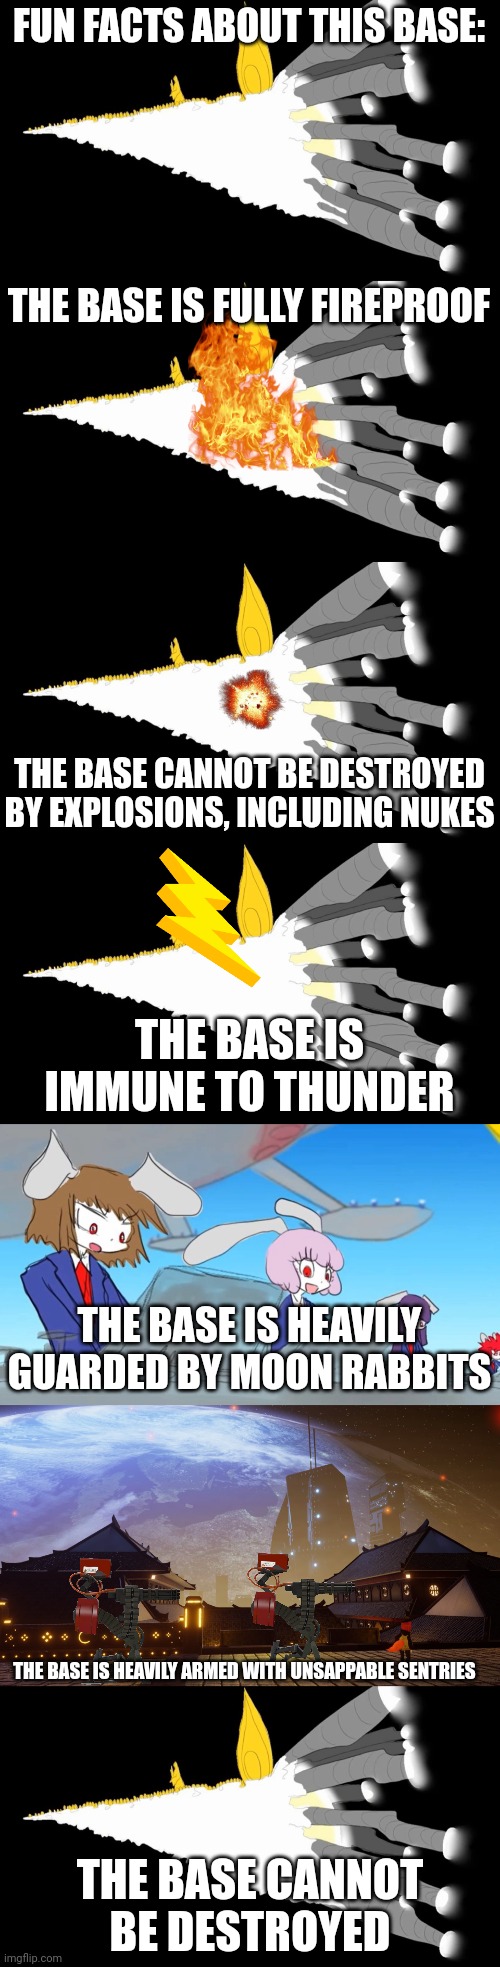 Fun facts about the base | FUN FACTS ABOUT THIS BASE:; THE BASE IS FULLY FIREPROOF; THE BASE CANNOT BE DESTROYED BY EXPLOSIONS, INCLUDING NUKES; THE BASE IS IMMUNE TO THUNDER; THE BASE IS HEAVILY GUARDED BY MOON RABBITS; THE BASE IS HEAVILY ARMED WITH UNSAPPABLE SENTRIES; THE BASE CANNOT BE DESTROYED | made w/ Imgflip meme maker